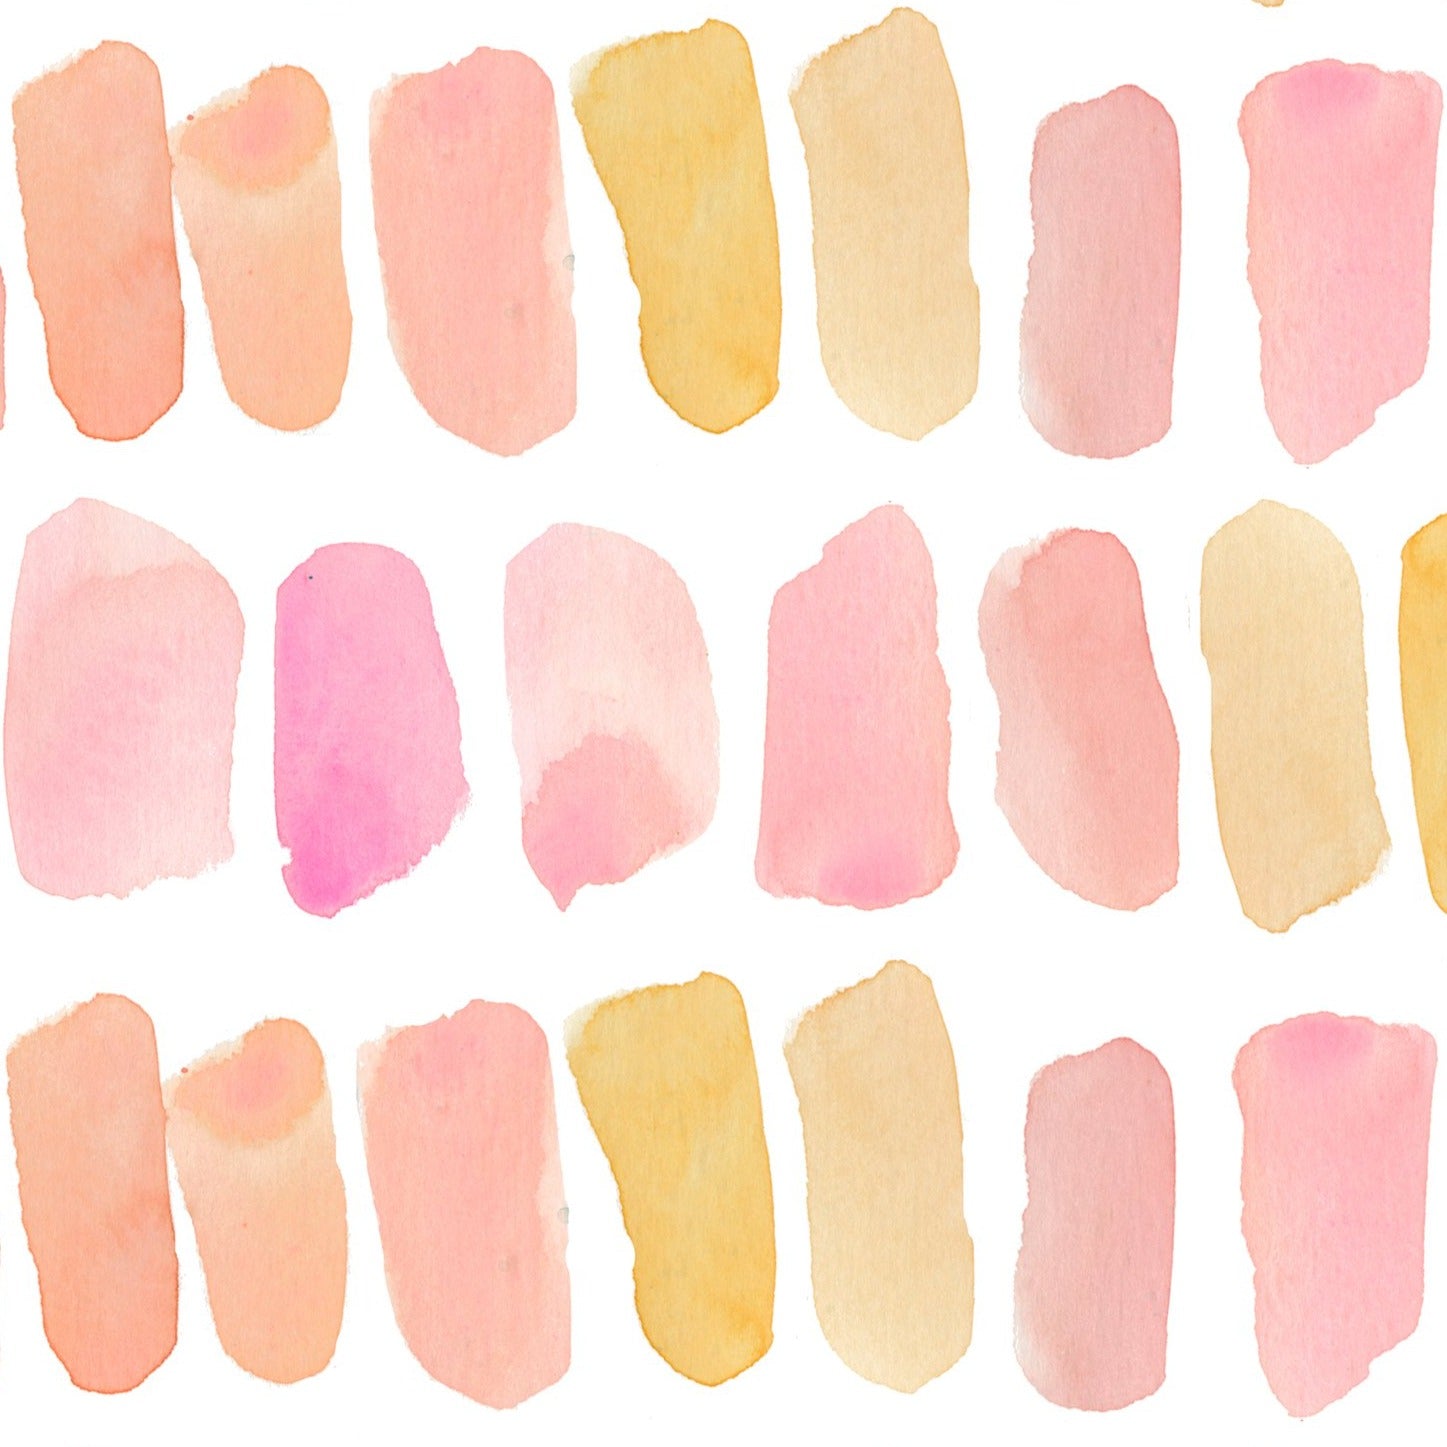 Close-up of the hand-painted wallpaper displaying a pattern of irregularly shaped dashes in shades of pink, peach, and yellow. The texture and watercolor style of the painting give it a soft and inviting appearance.